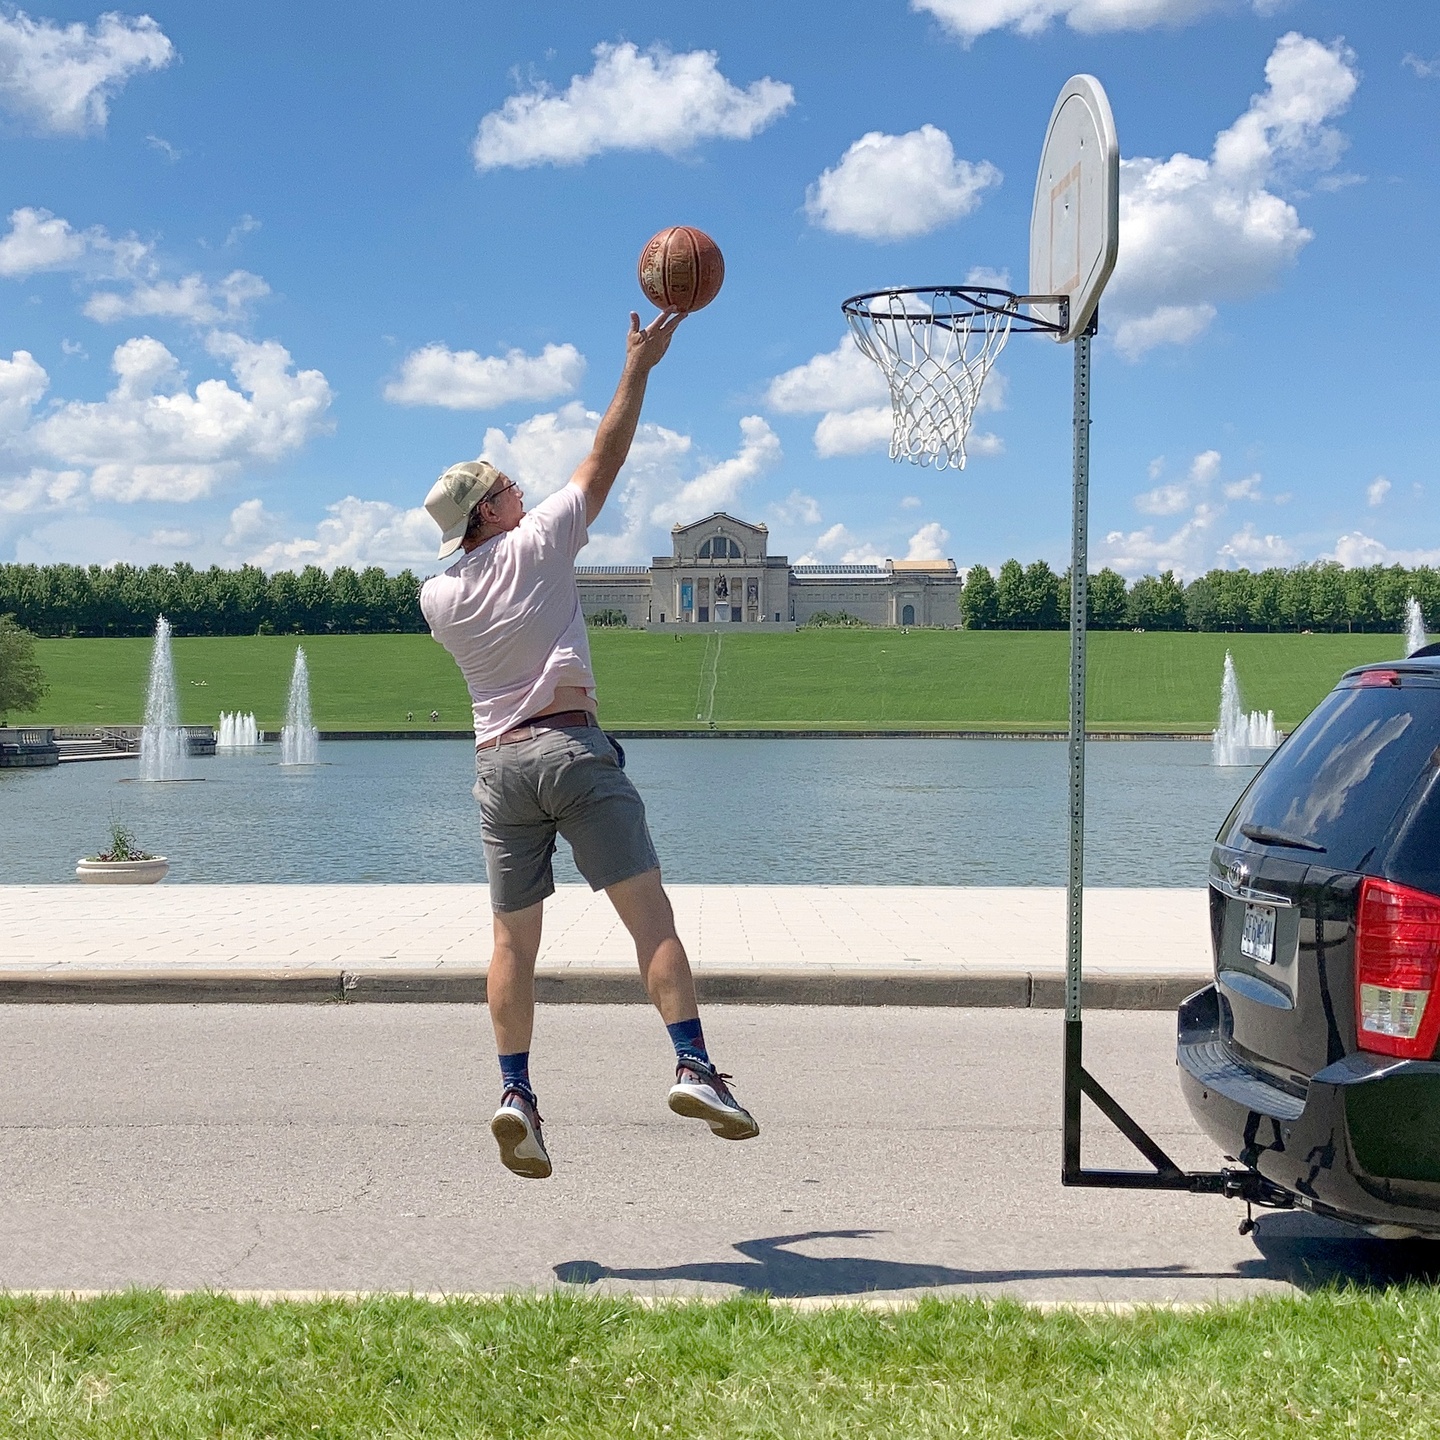 An individual jumping and shooting a basketball, on a temporary court in front of St. Louis Forest Park's Grand Basin